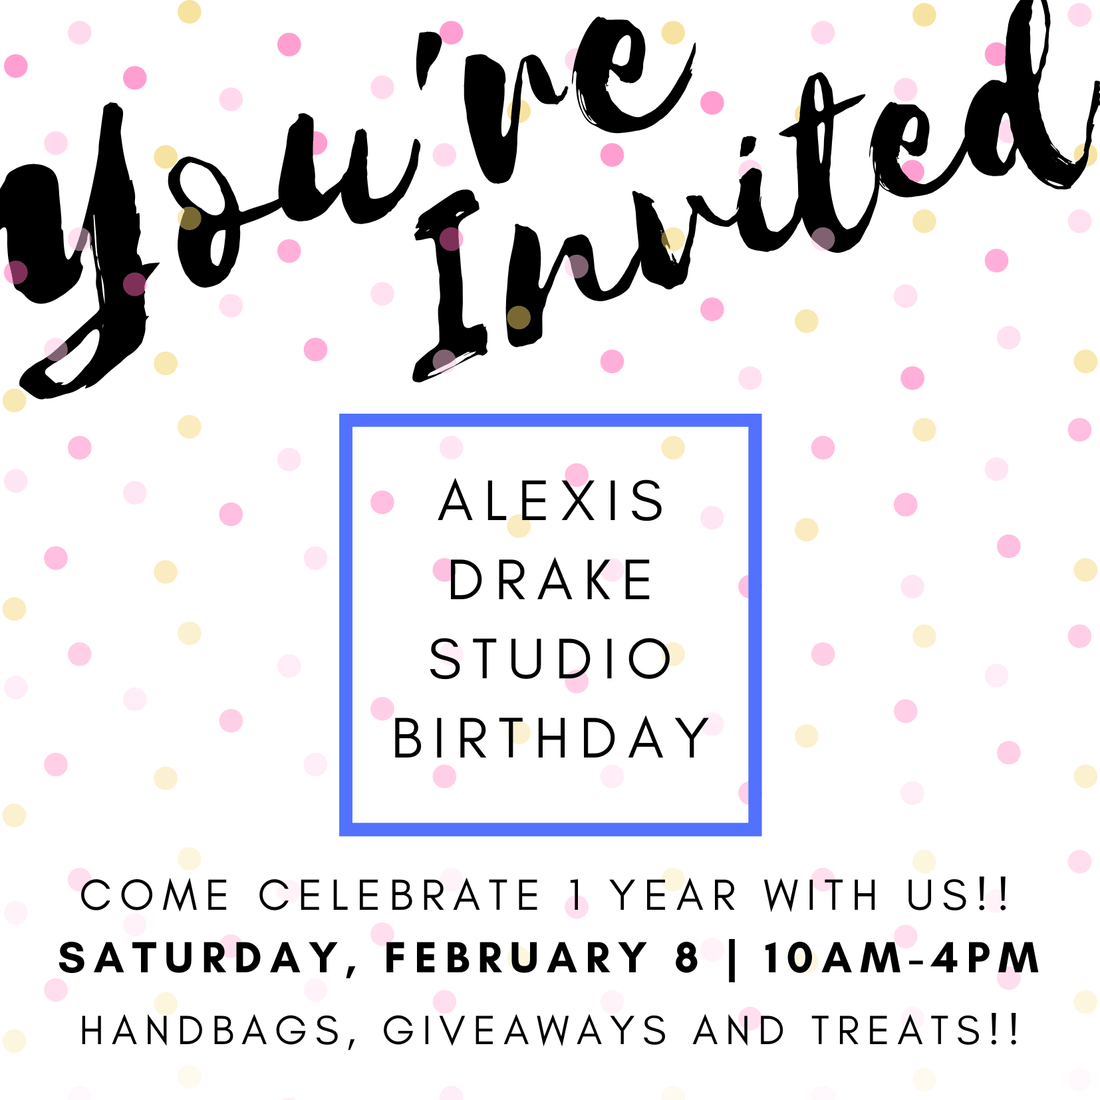 Celebrate 1 Year With Us! - Alexis Drake